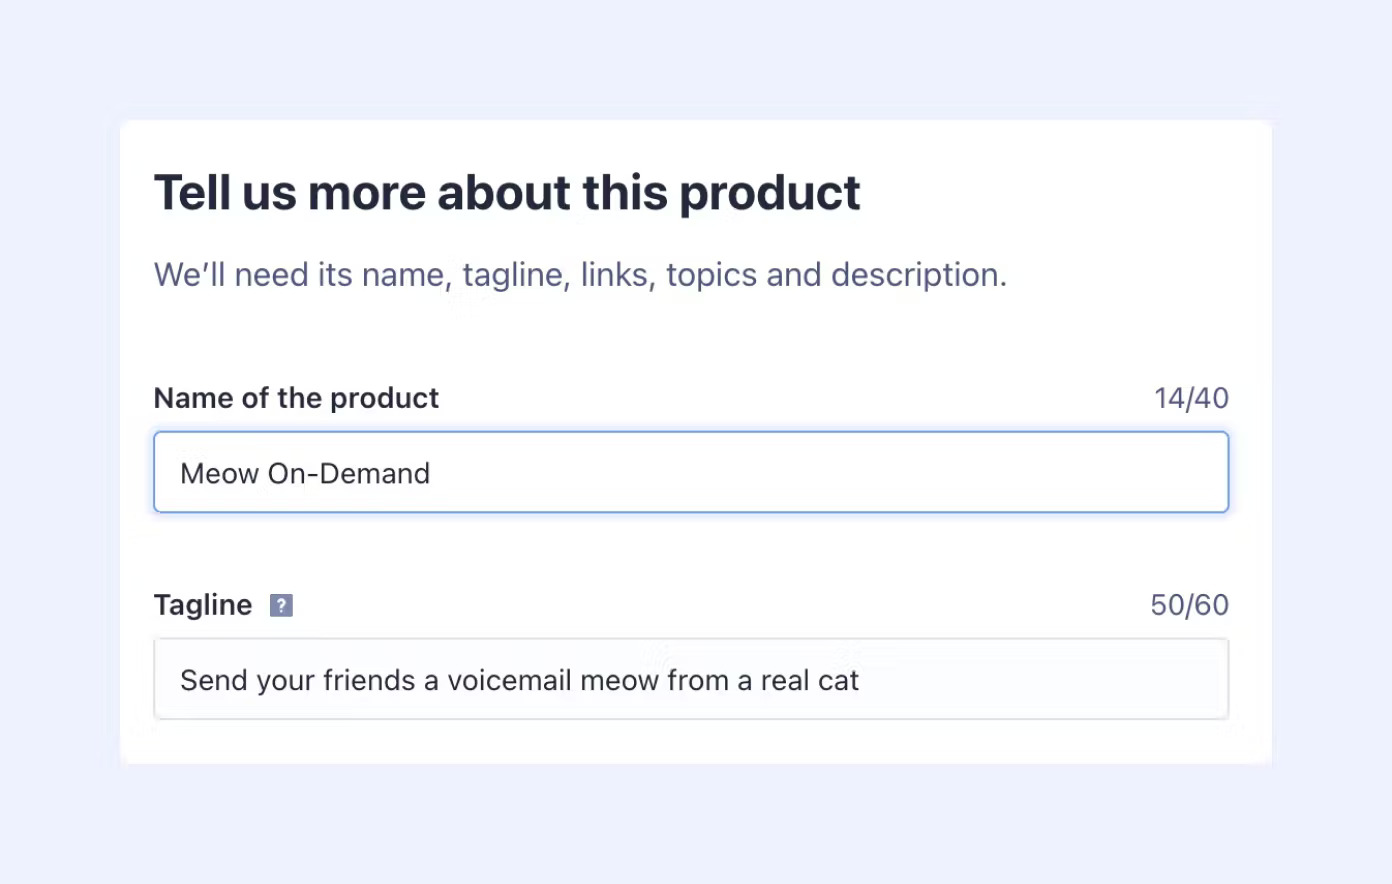 How to Launch on Product Hunt- The Step-by-Step Process